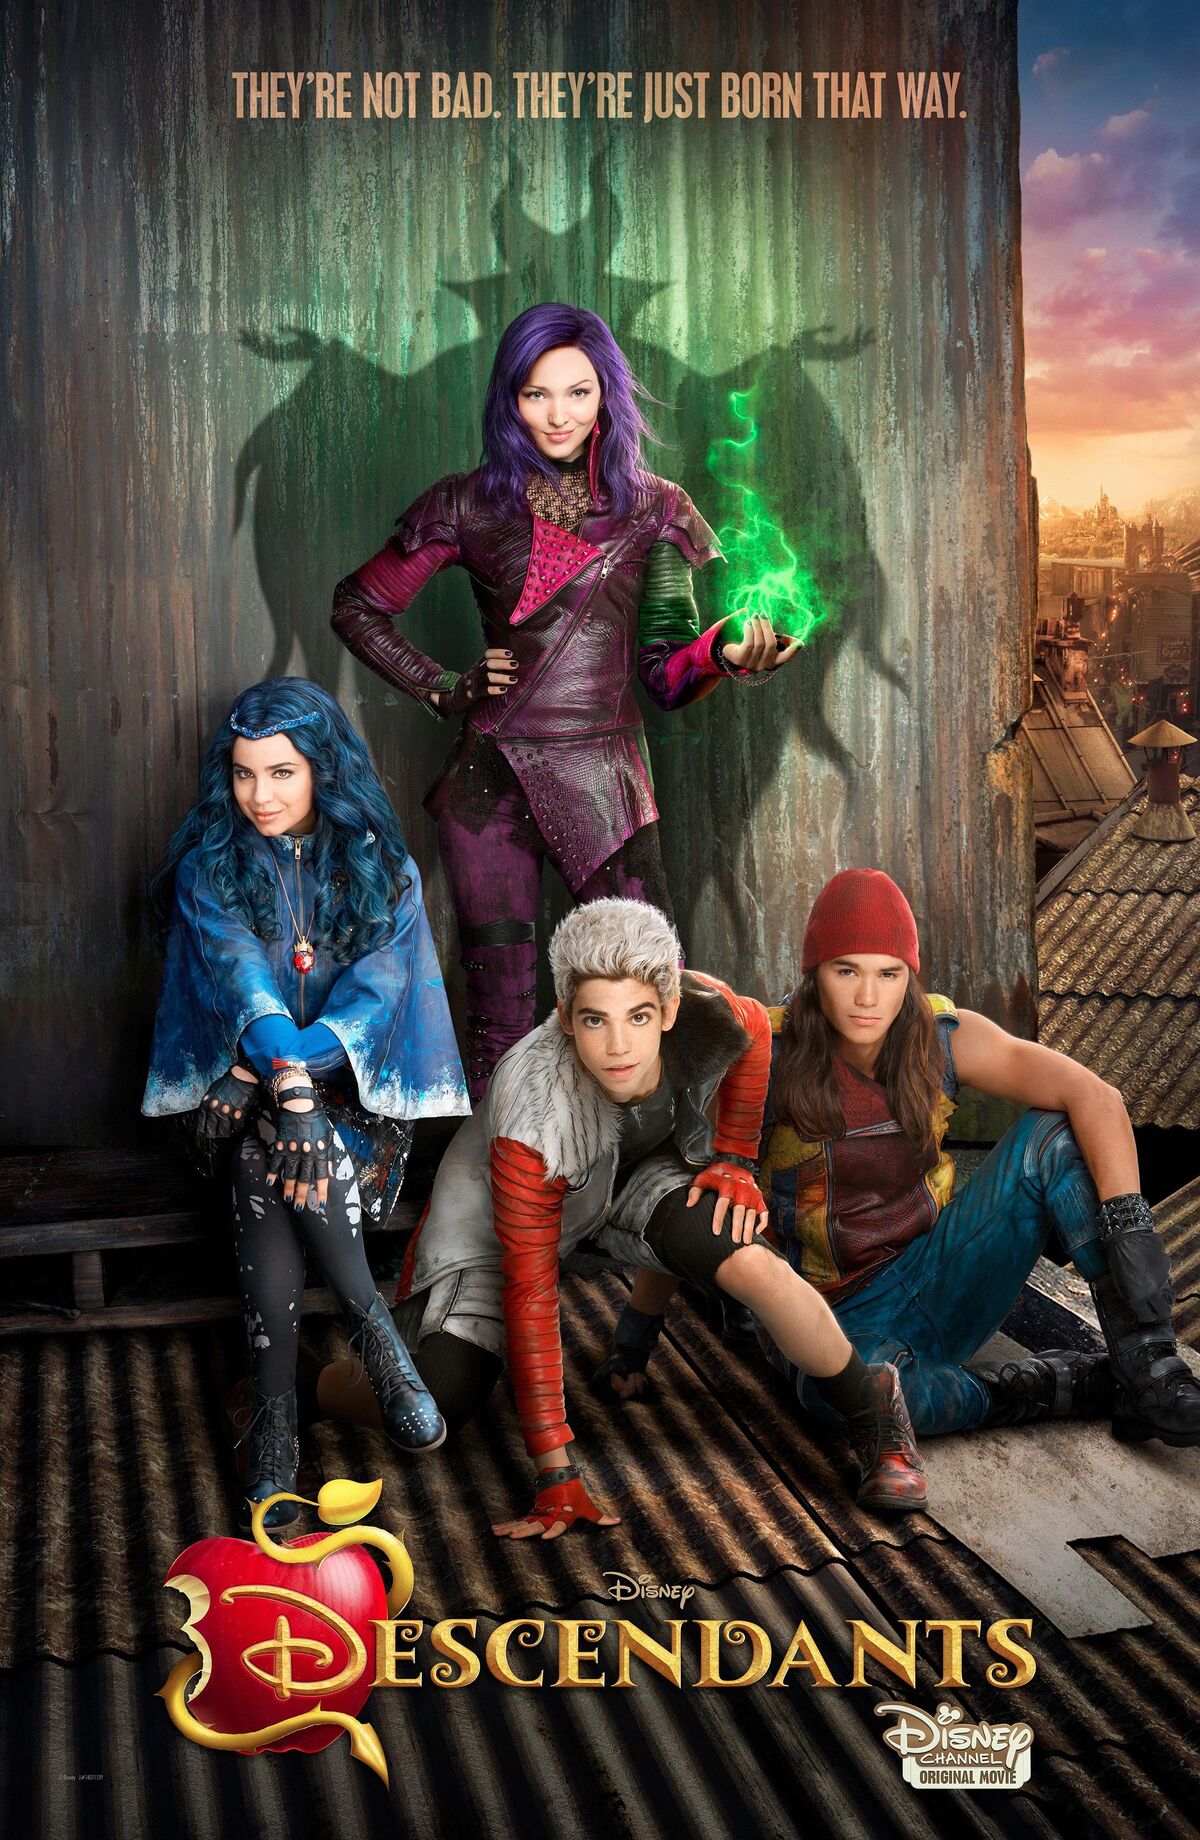 The Magical Roles of TOMORROWLAND and DESCENDANTS' Jedidiah Goodacre